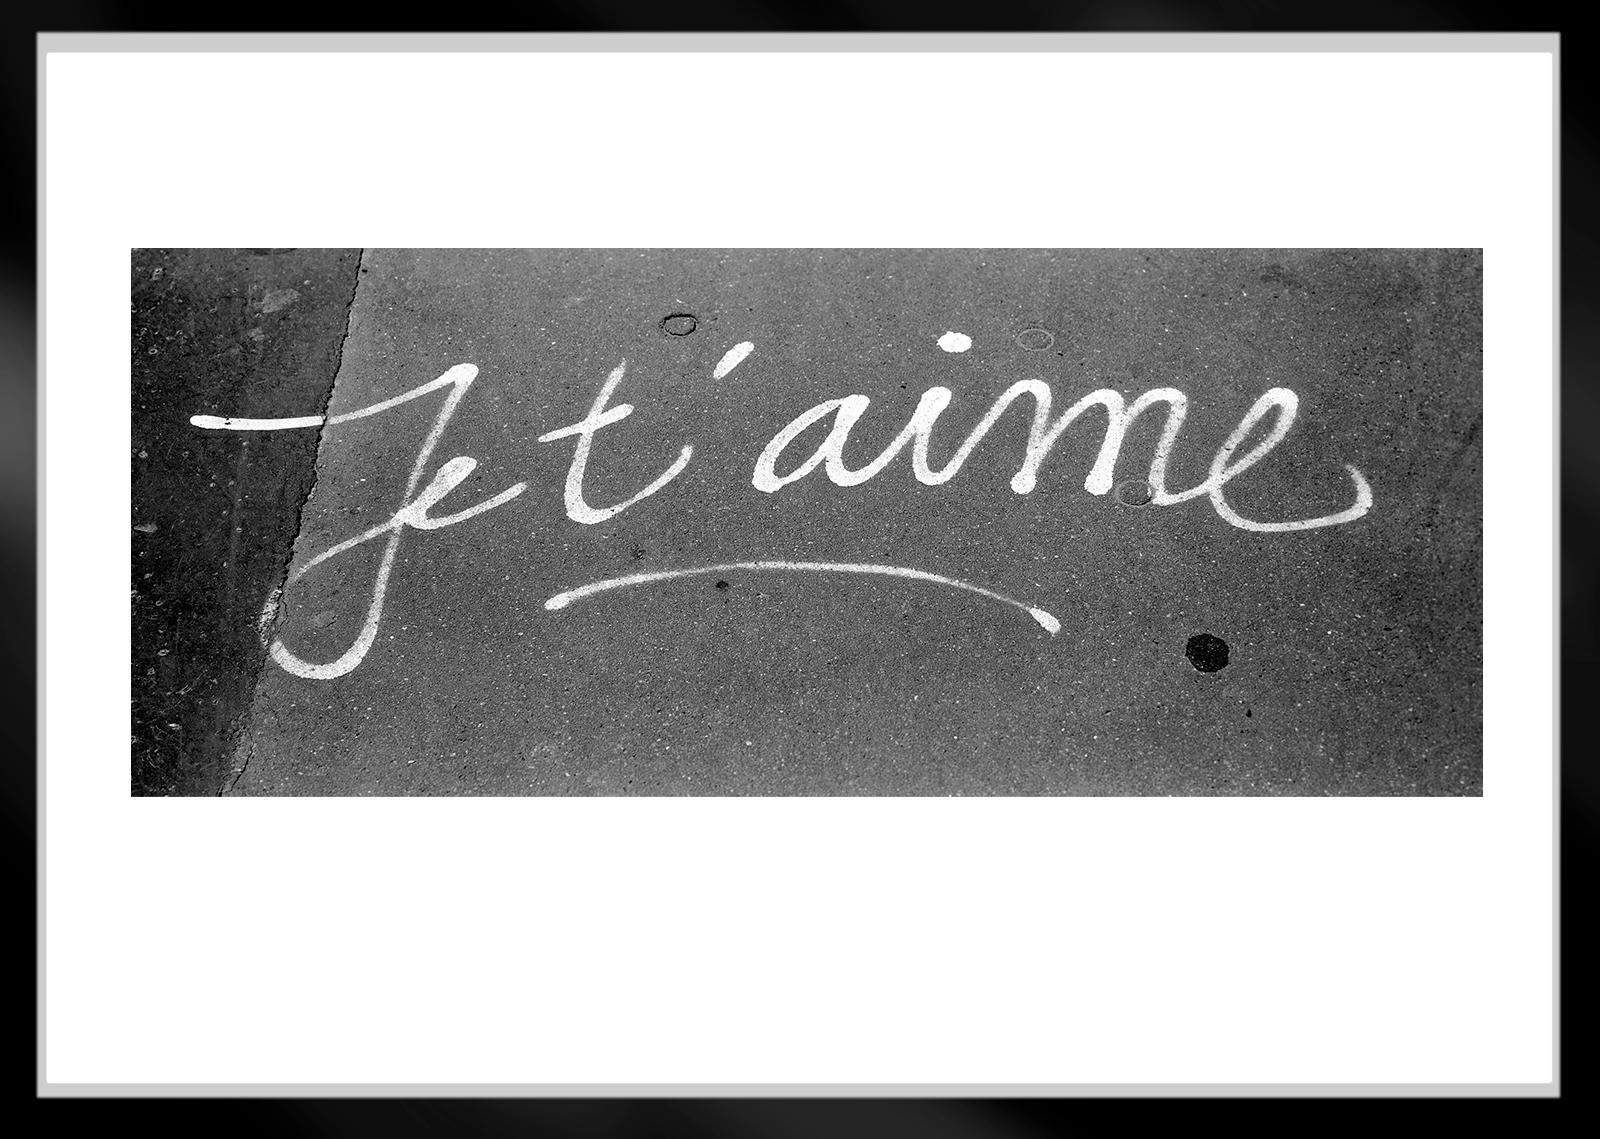 Je t'aime - Signed limited edition fine art print, Black white photo, still life - Contemporary Photograph by Ian Sanderson